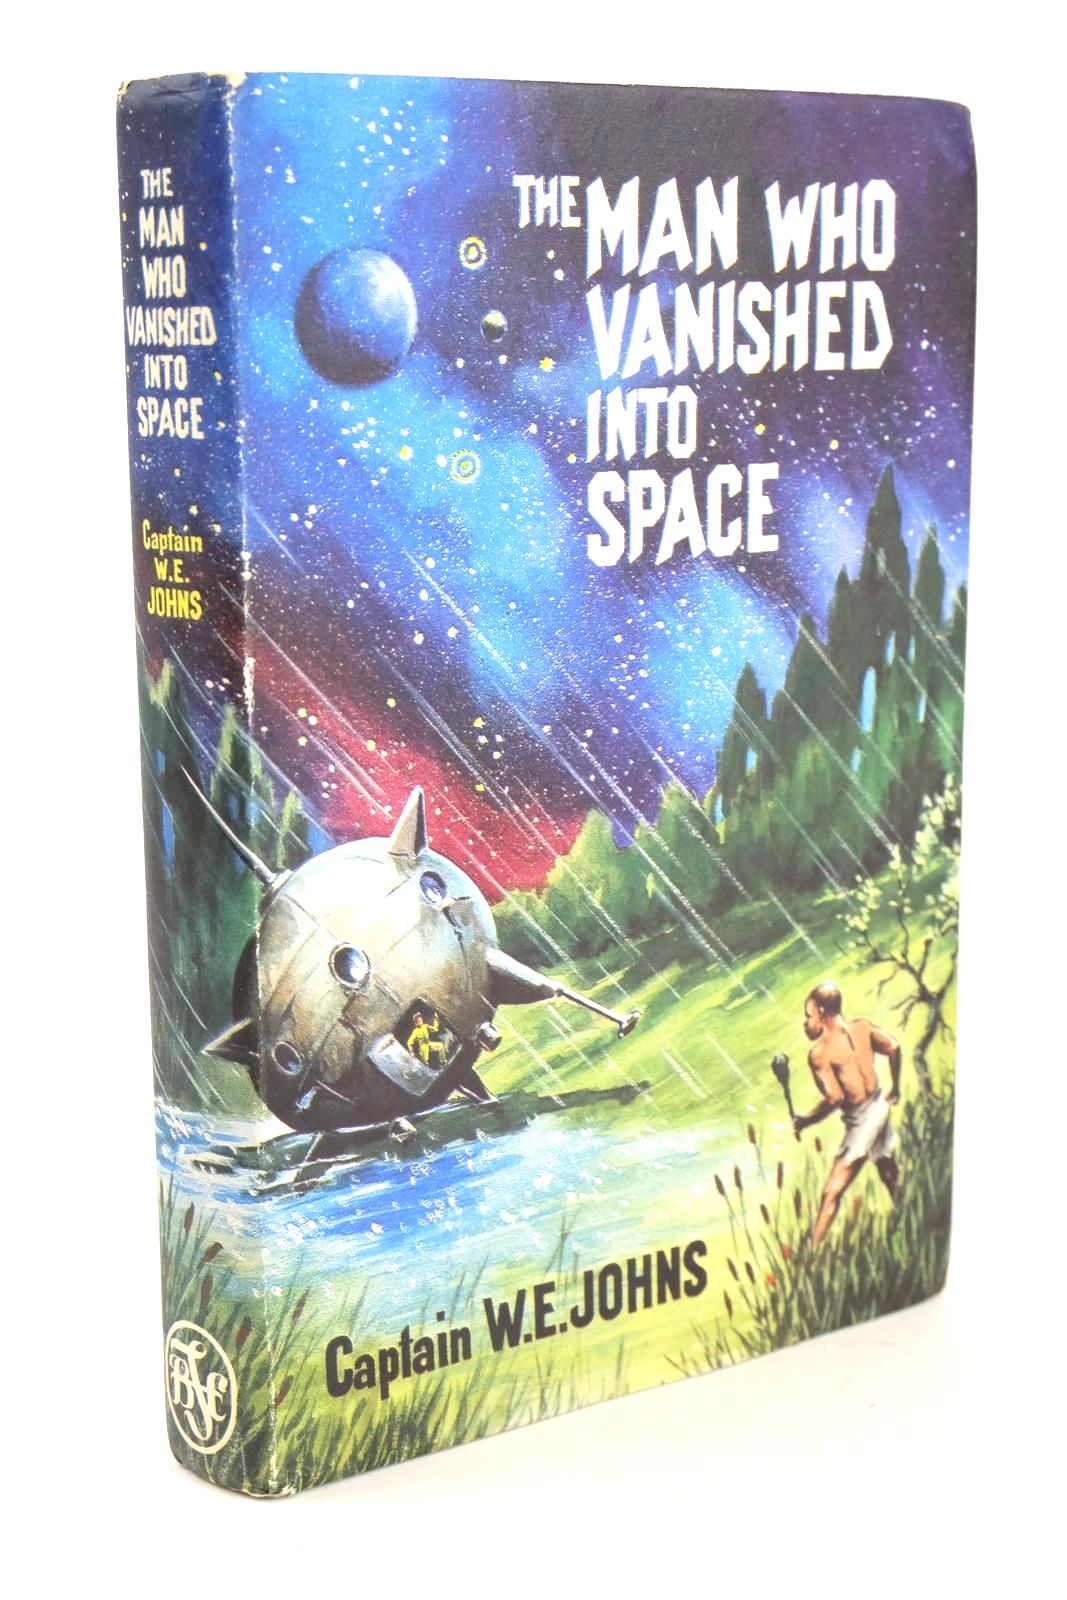 Photo of THE MAN WHO VANISHED INTO SPACE written by Johns, W.E. published by The Children's Book Club (STOCK CODE: 1326026)  for sale by Stella & Rose's Books